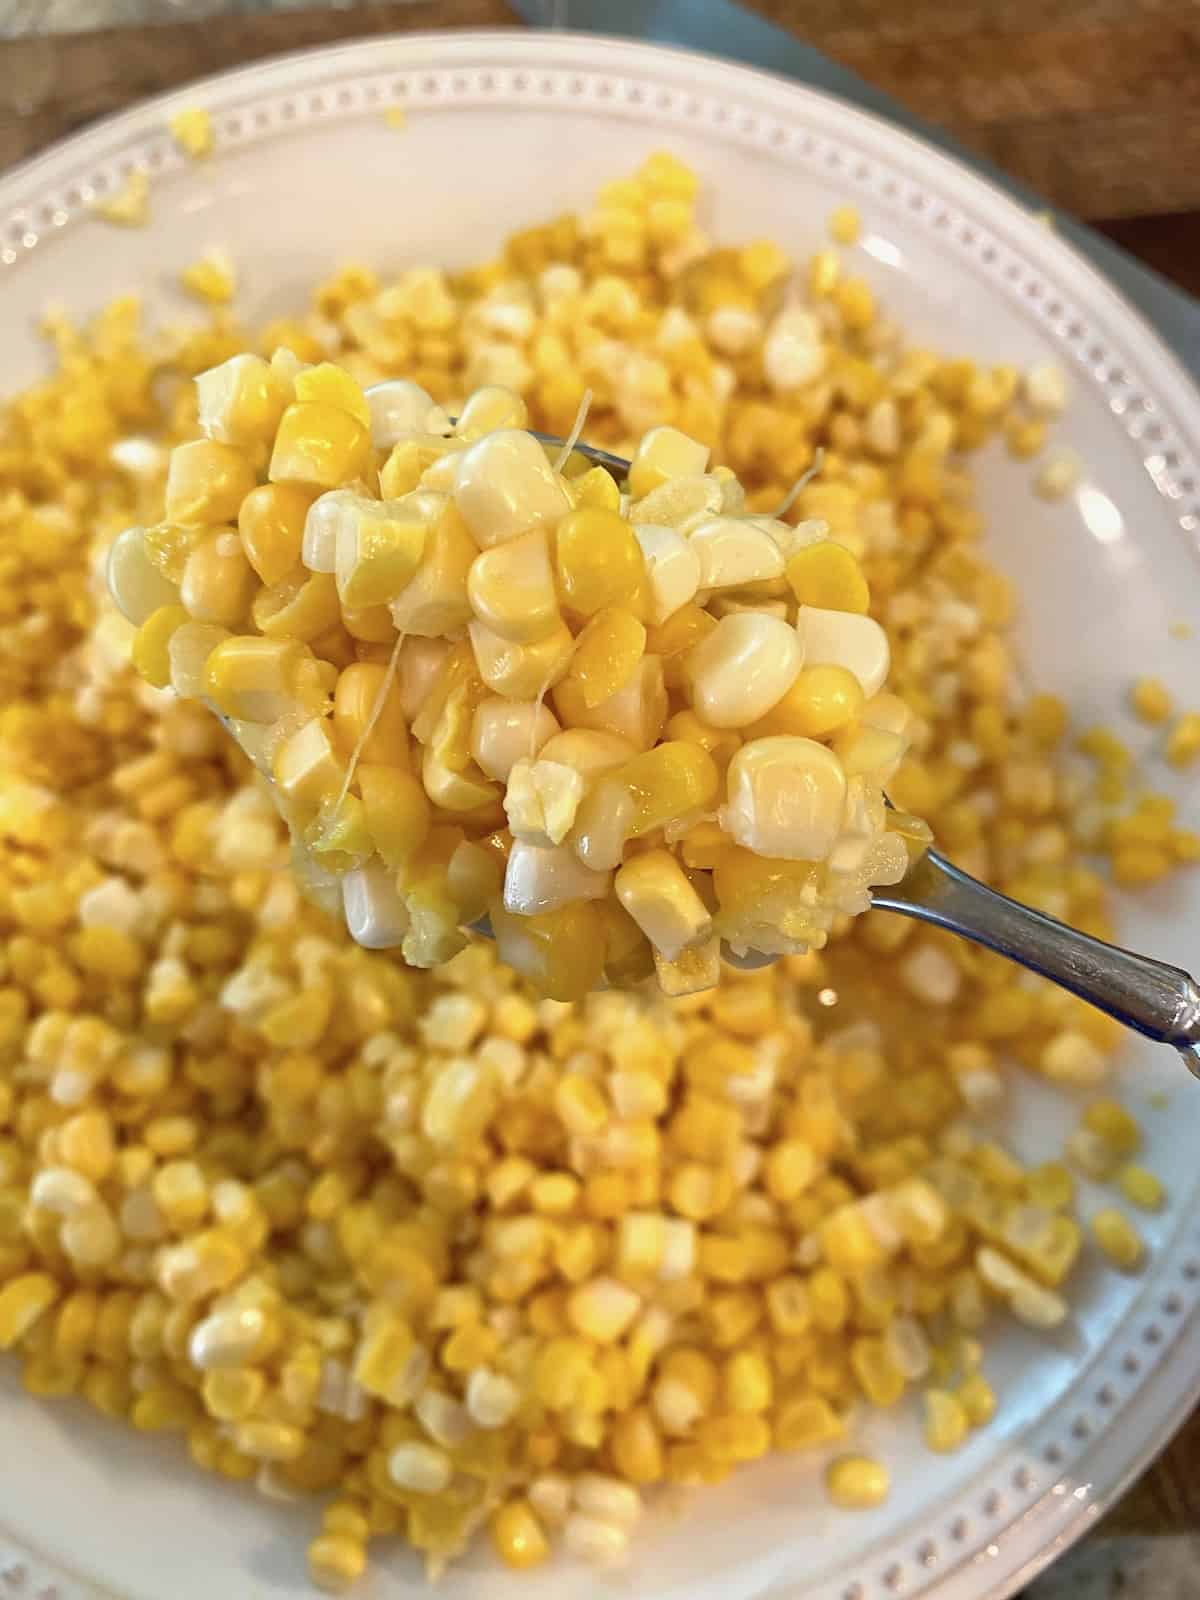 A plate full of fresh, whole kernel corn.